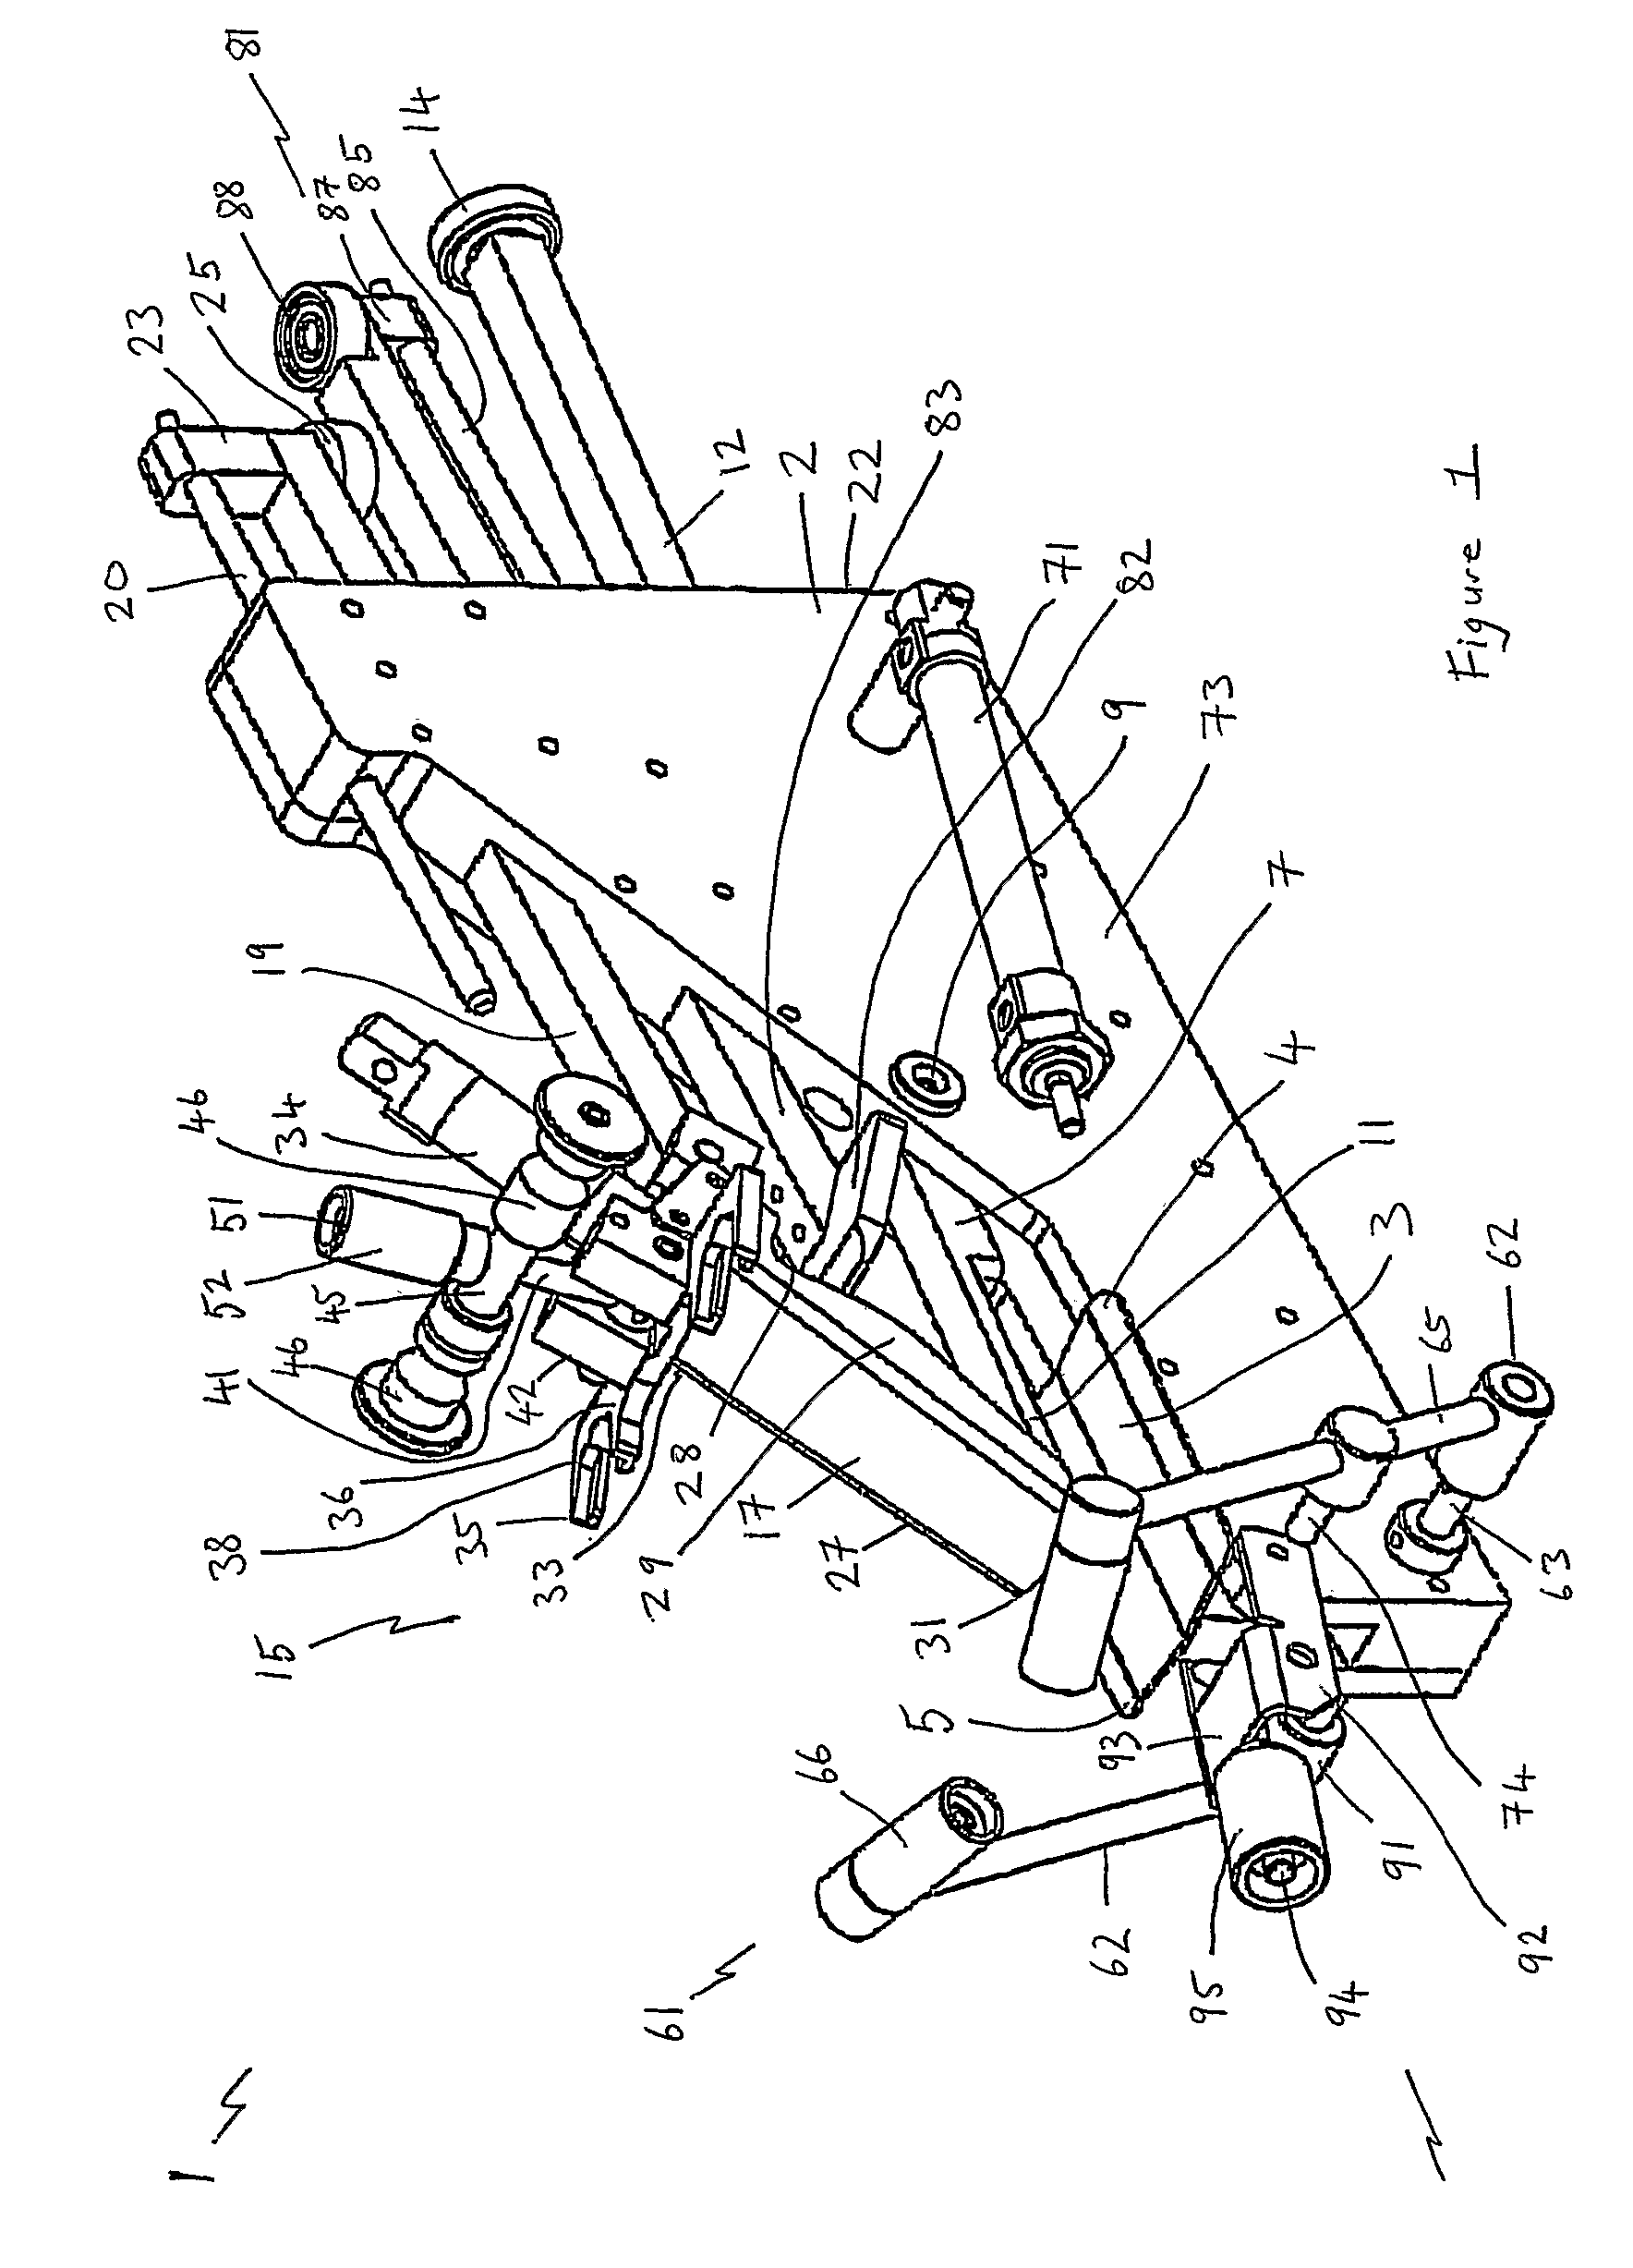 Apparatus for trussing a bird